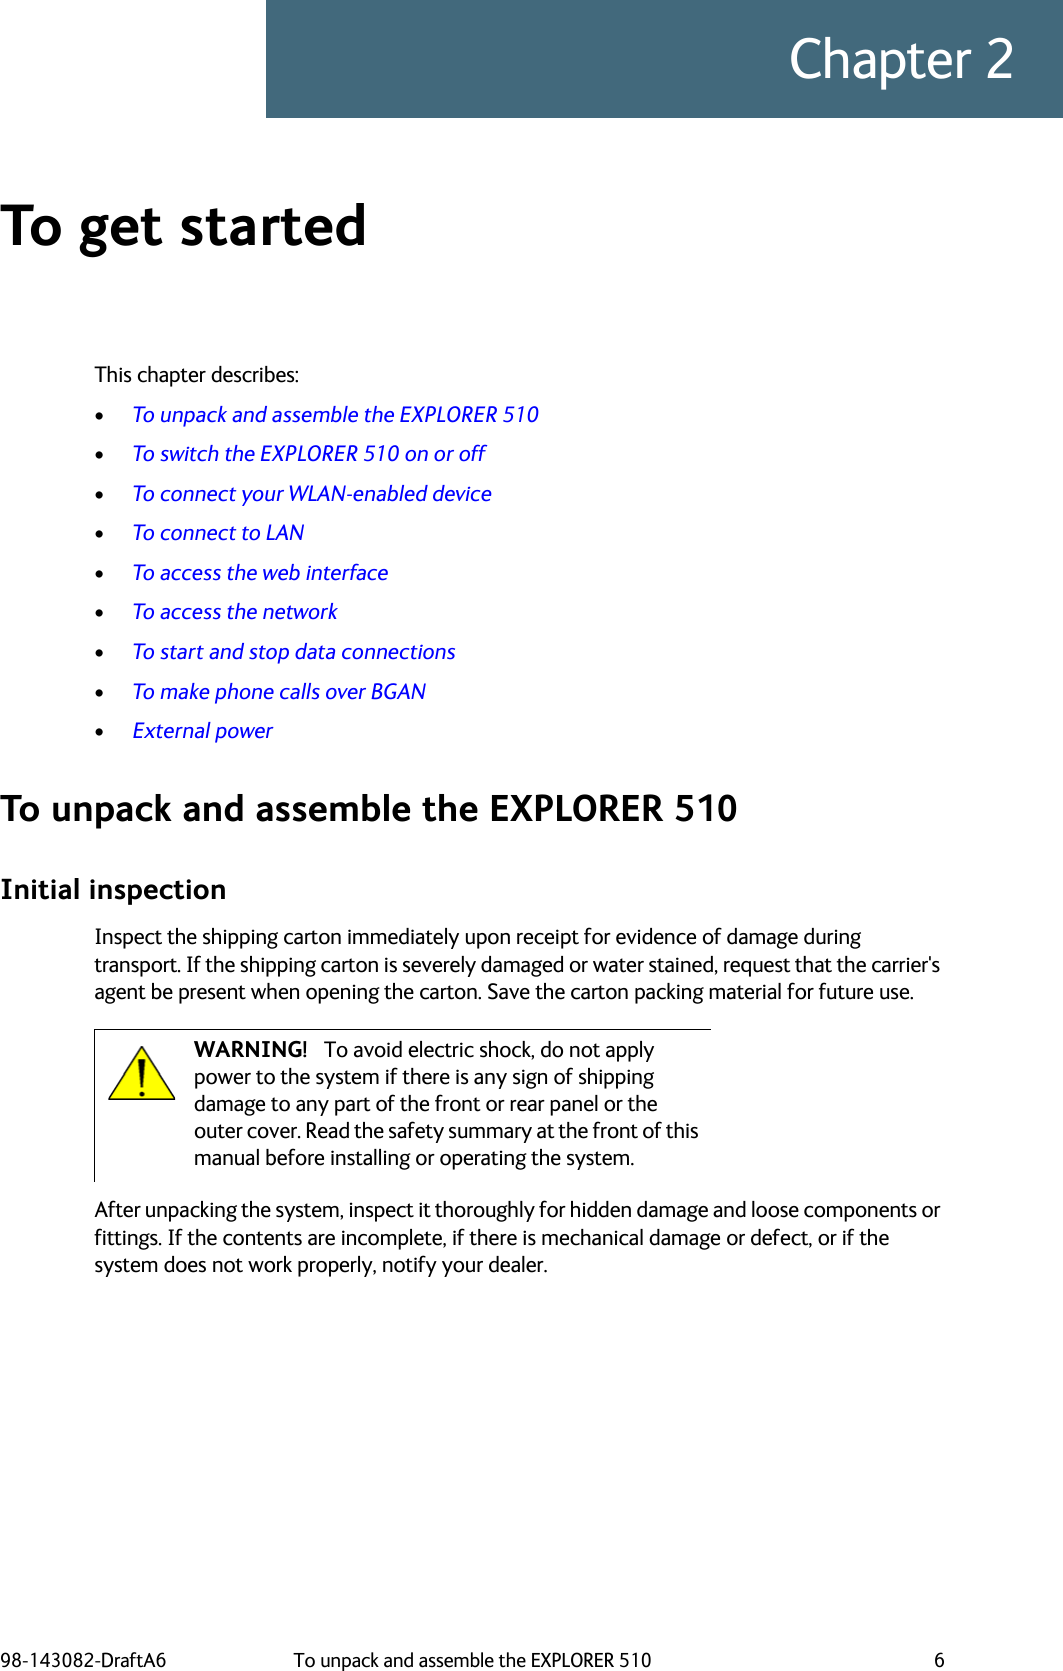 98-143082-DraftA6 To unpack and assemble the EXPLORER 510 6Chapter 2To get started 2This chapter describes:•To unpack and assemble the EXPLORER 510•To switch the EXPLORER 510 on or off•To connect your WLAN-enabled device•To connect to LAN•To access the web interface•To access the network•To start and stop data connections•To make phone calls over BGAN•External powerTo unpack and assemble the EXPLORER 510Initial inspectionInspect the shipping carton immediately upon receipt for evidence of damage during transport. If the shipping carton is severely damaged or water stained, request that the carrier&apos;s agent be present when opening the carton. Save the carton packing material for future use.After unpacking the system, inspect it thoroughly for hidden damage and loose components or fittings. If the contents are incomplete, if there is mechanical damage or defect, or if the system does not work properly, notify your dealer. WARNING! To avoid electric shock, do not apply power to the system if there is any sign of shipping damage to any part of the front or rear panel or the outer cover. Read the safety summary at the front of this manual before installing or operating the system.